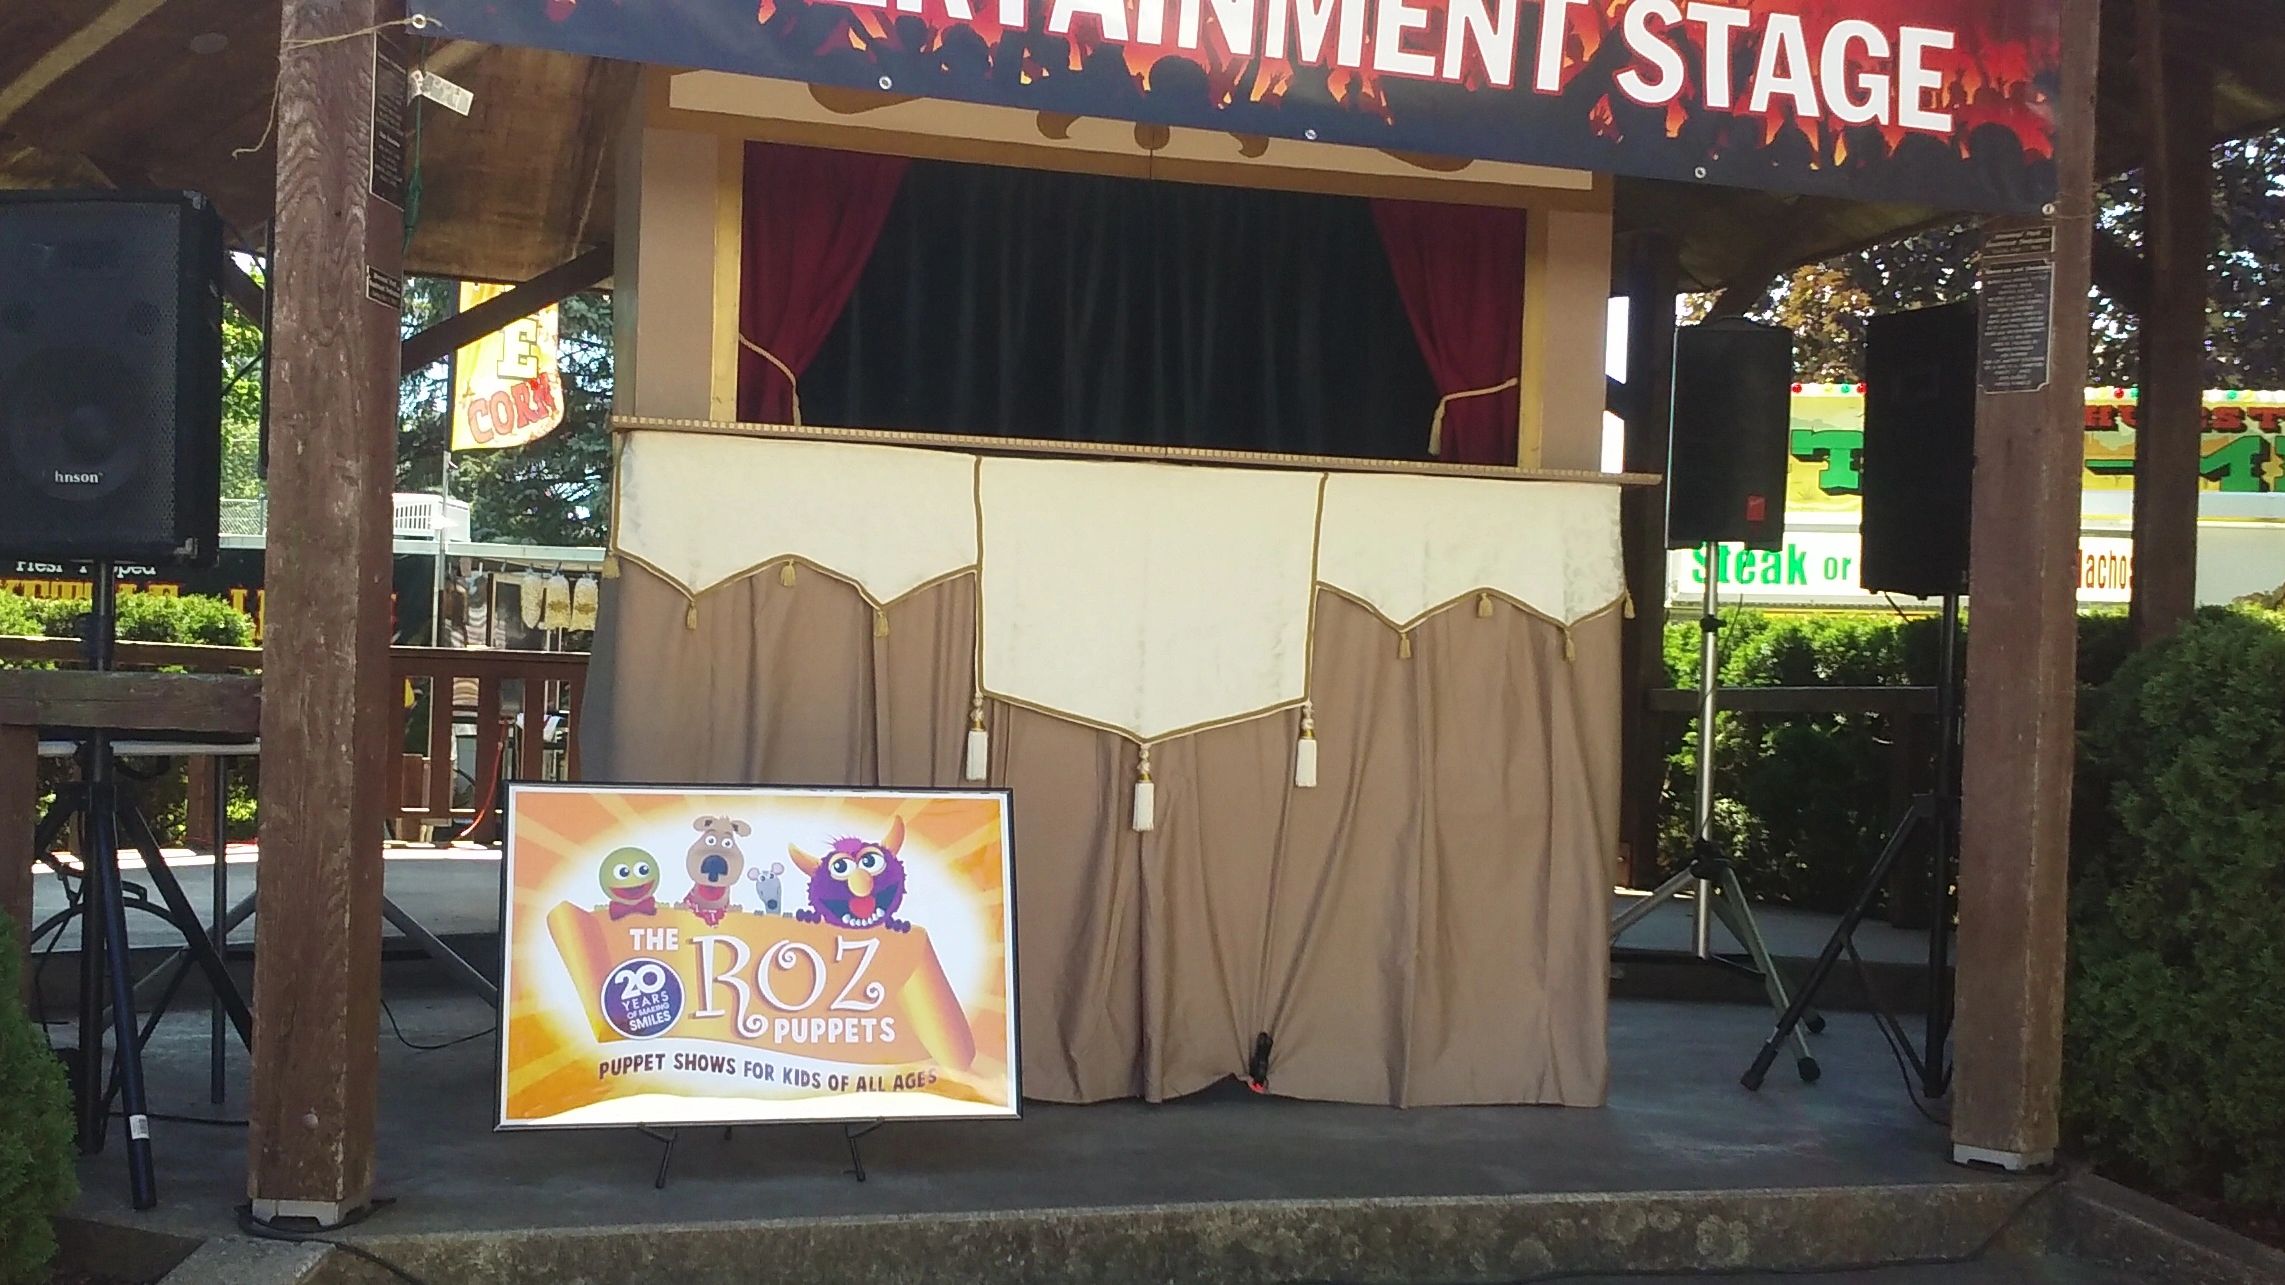 Puppet show stage under a gazebo at a summer festival.